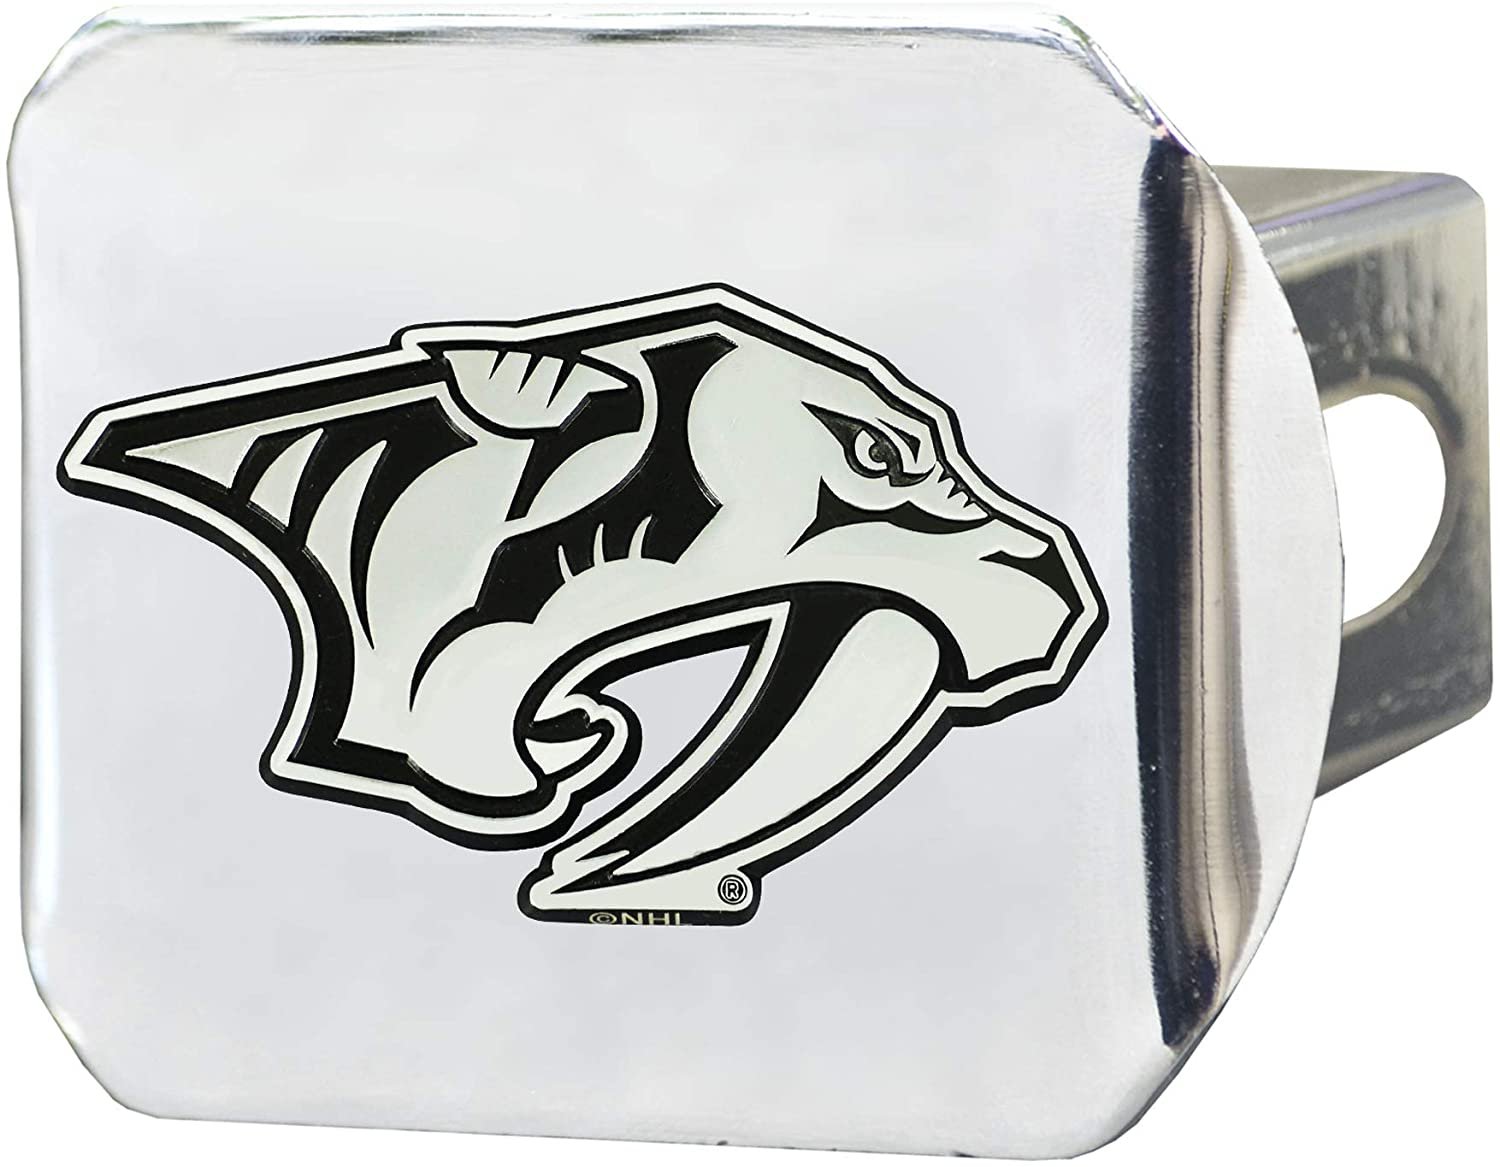 Nashville Predators Hitch Cover Solid Metal with Raised Chrome Metal Emblem 2" Square Type III